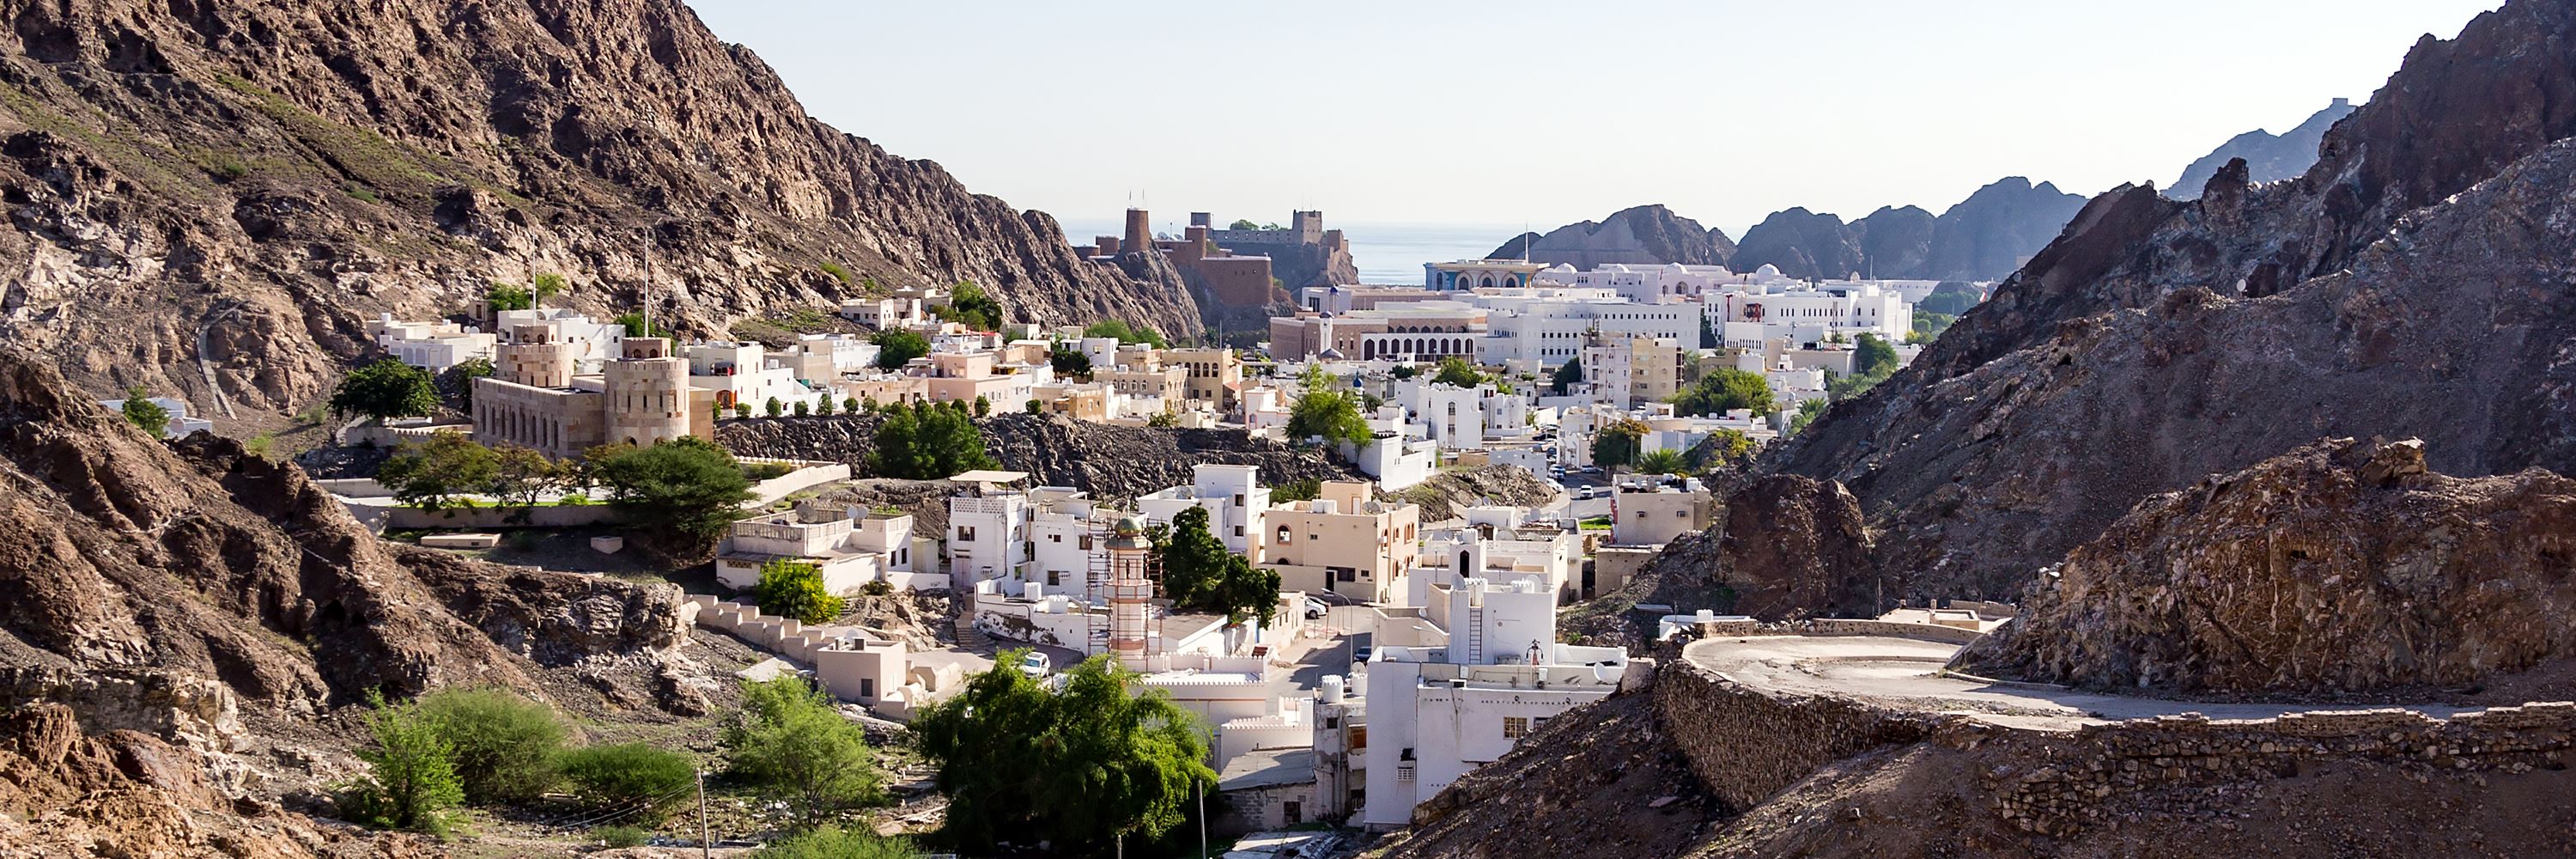 Oman Country Muscat City